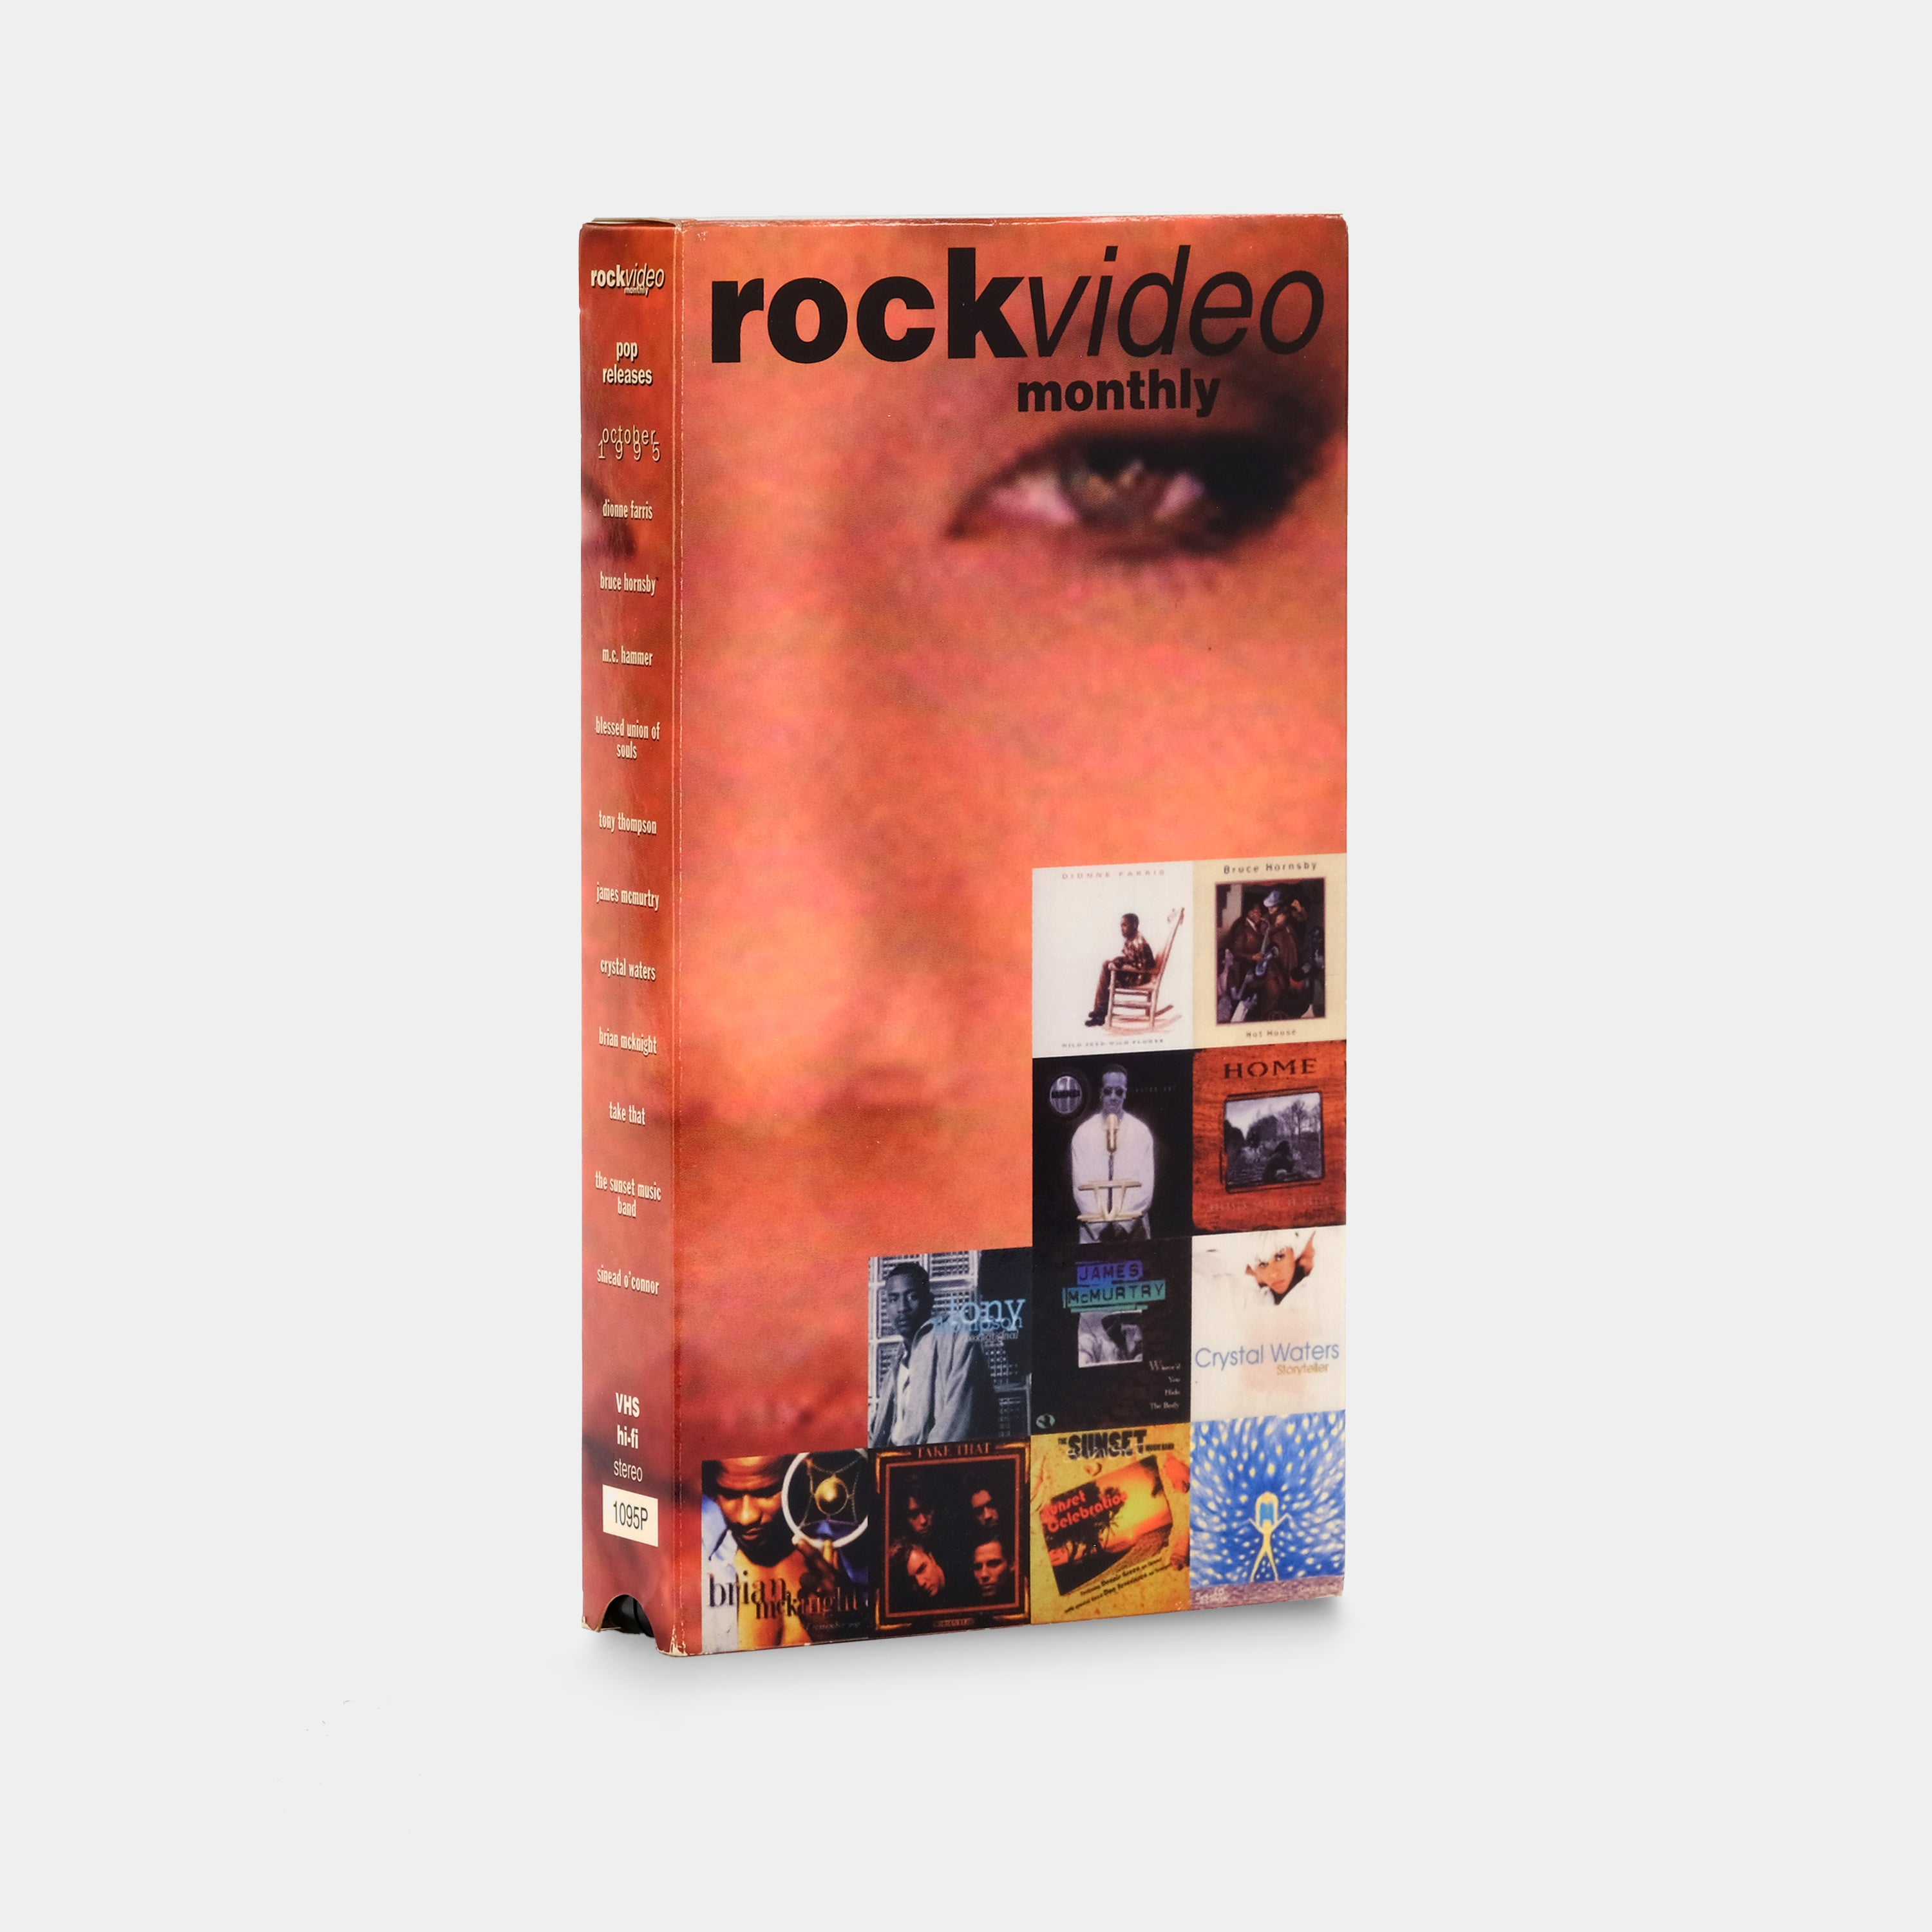 RockVideo Monthly - Pop Releases October 1995 VHS Tape